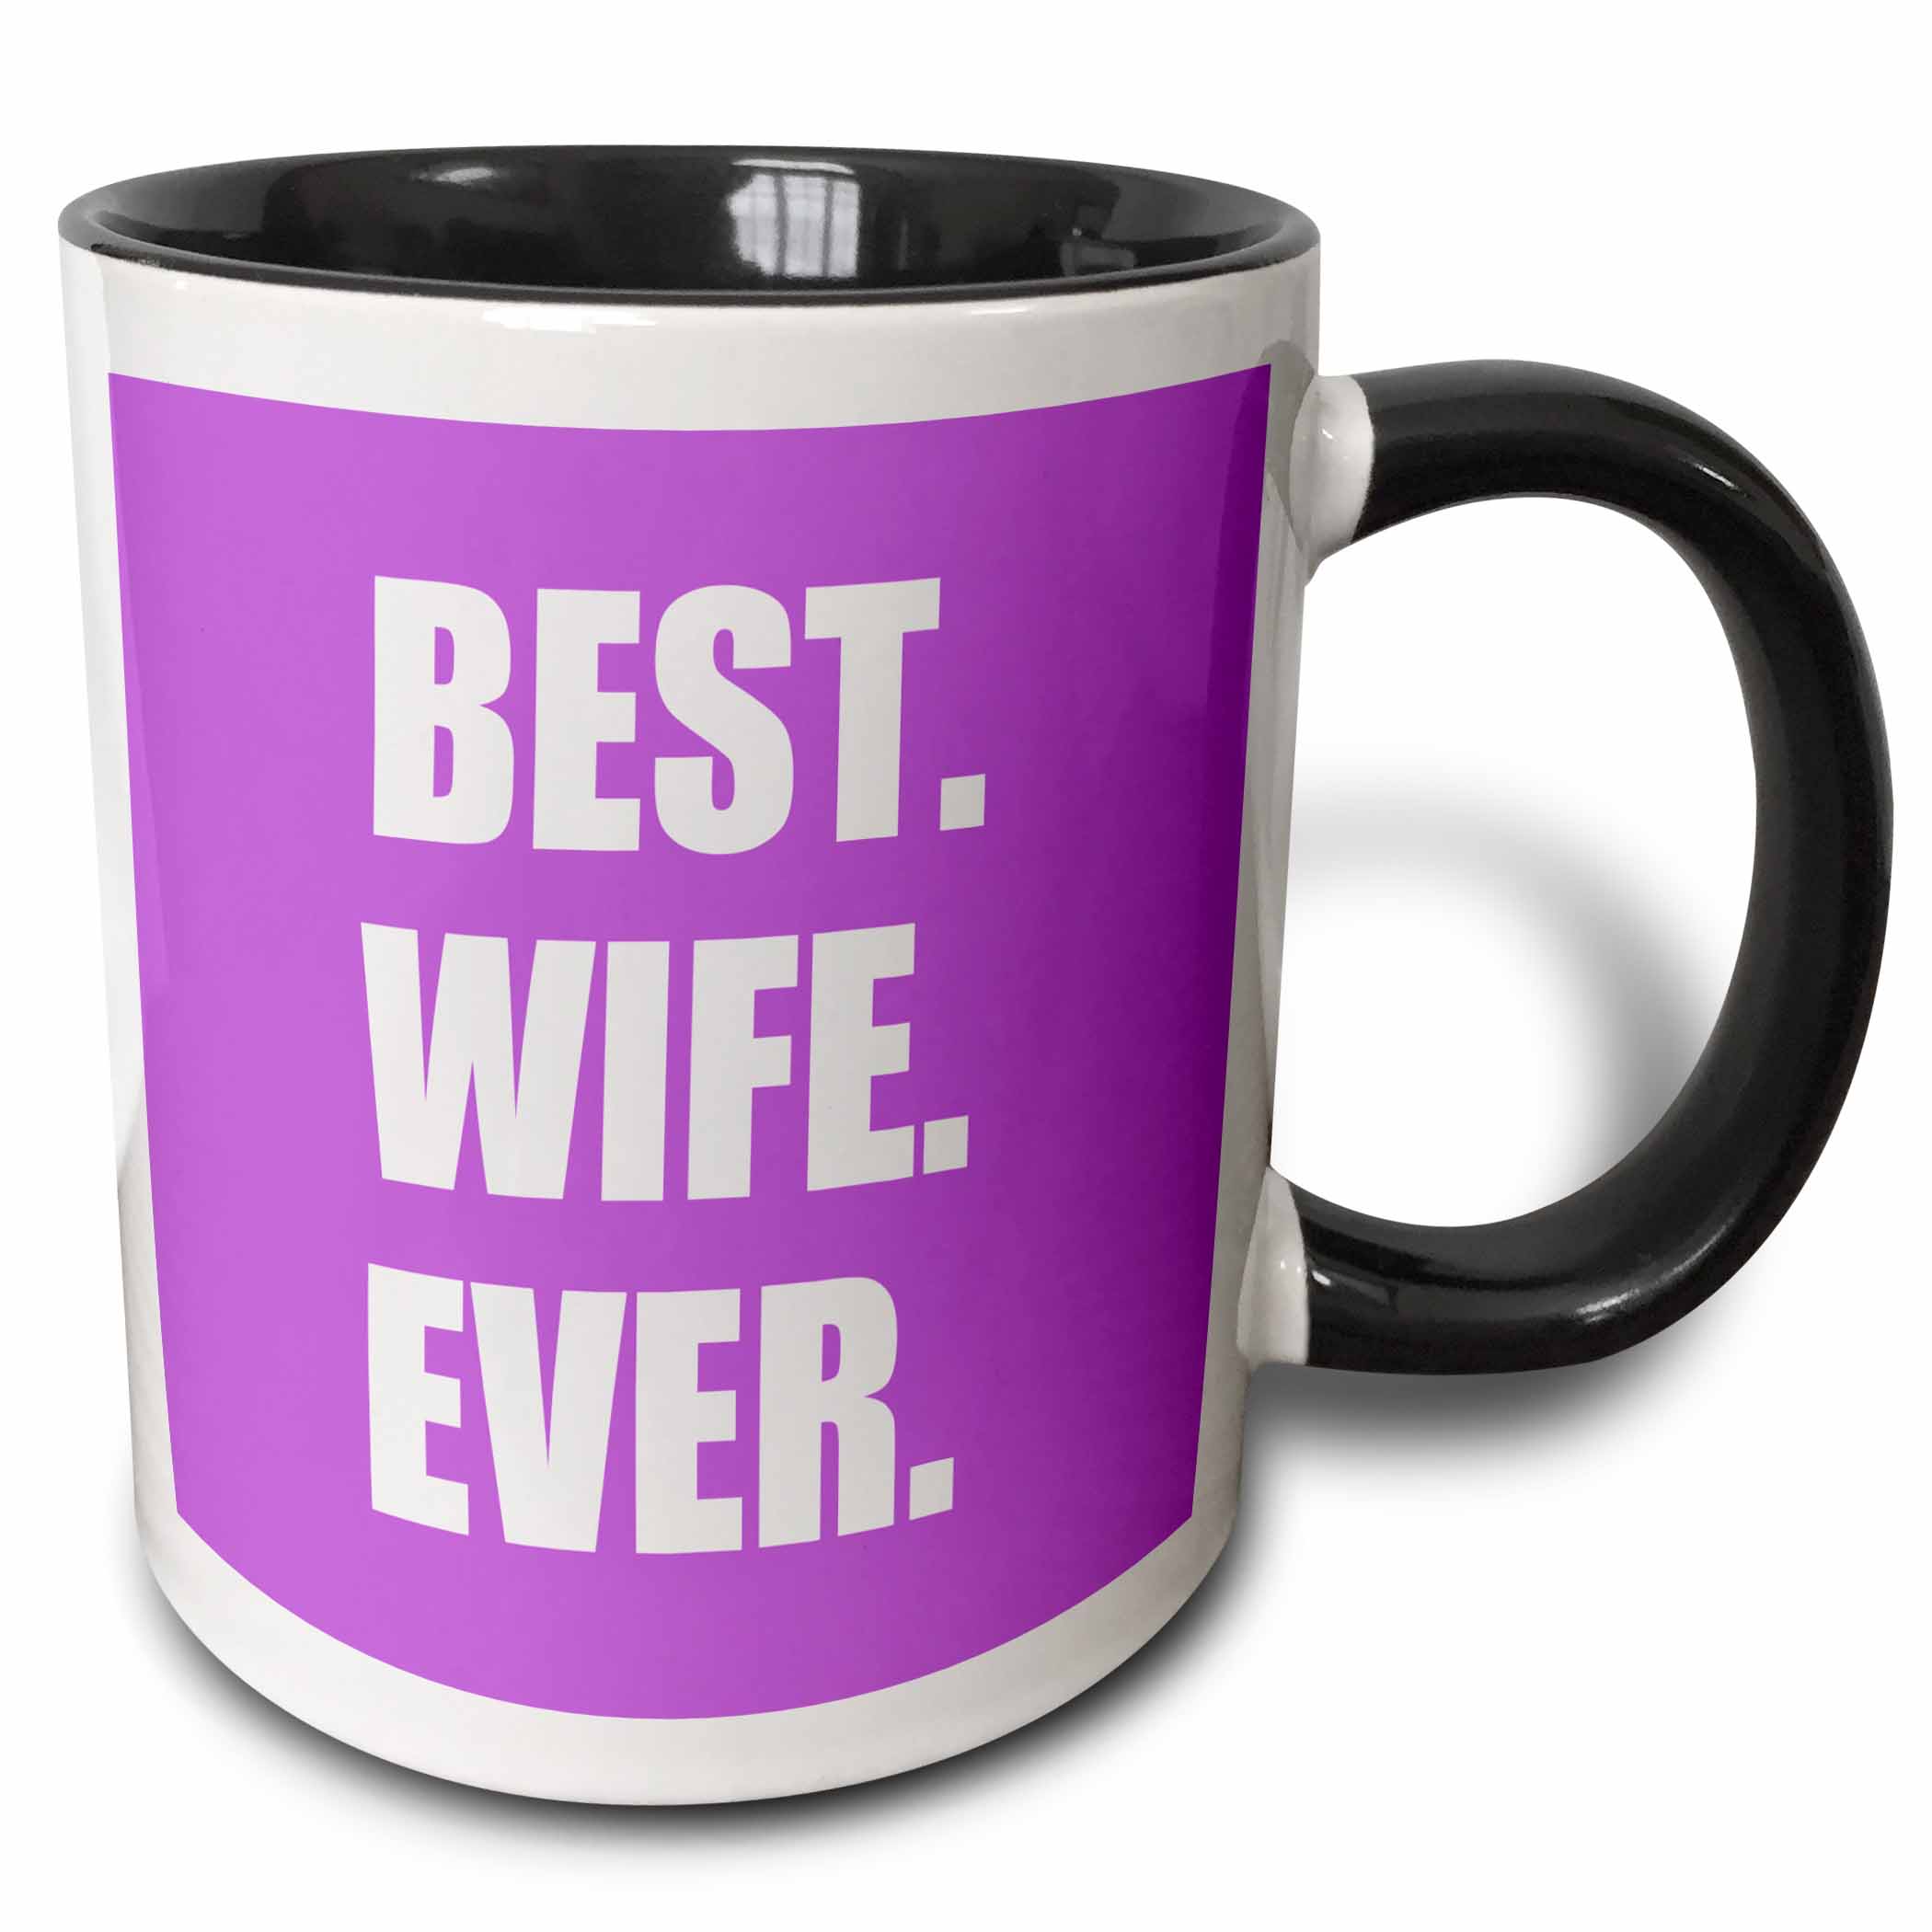 3dRose Purple Best Wife Ever - bold anniversary valentines day gift for her - Two Tone Black Mug, 11-ounce - image 1 of 3